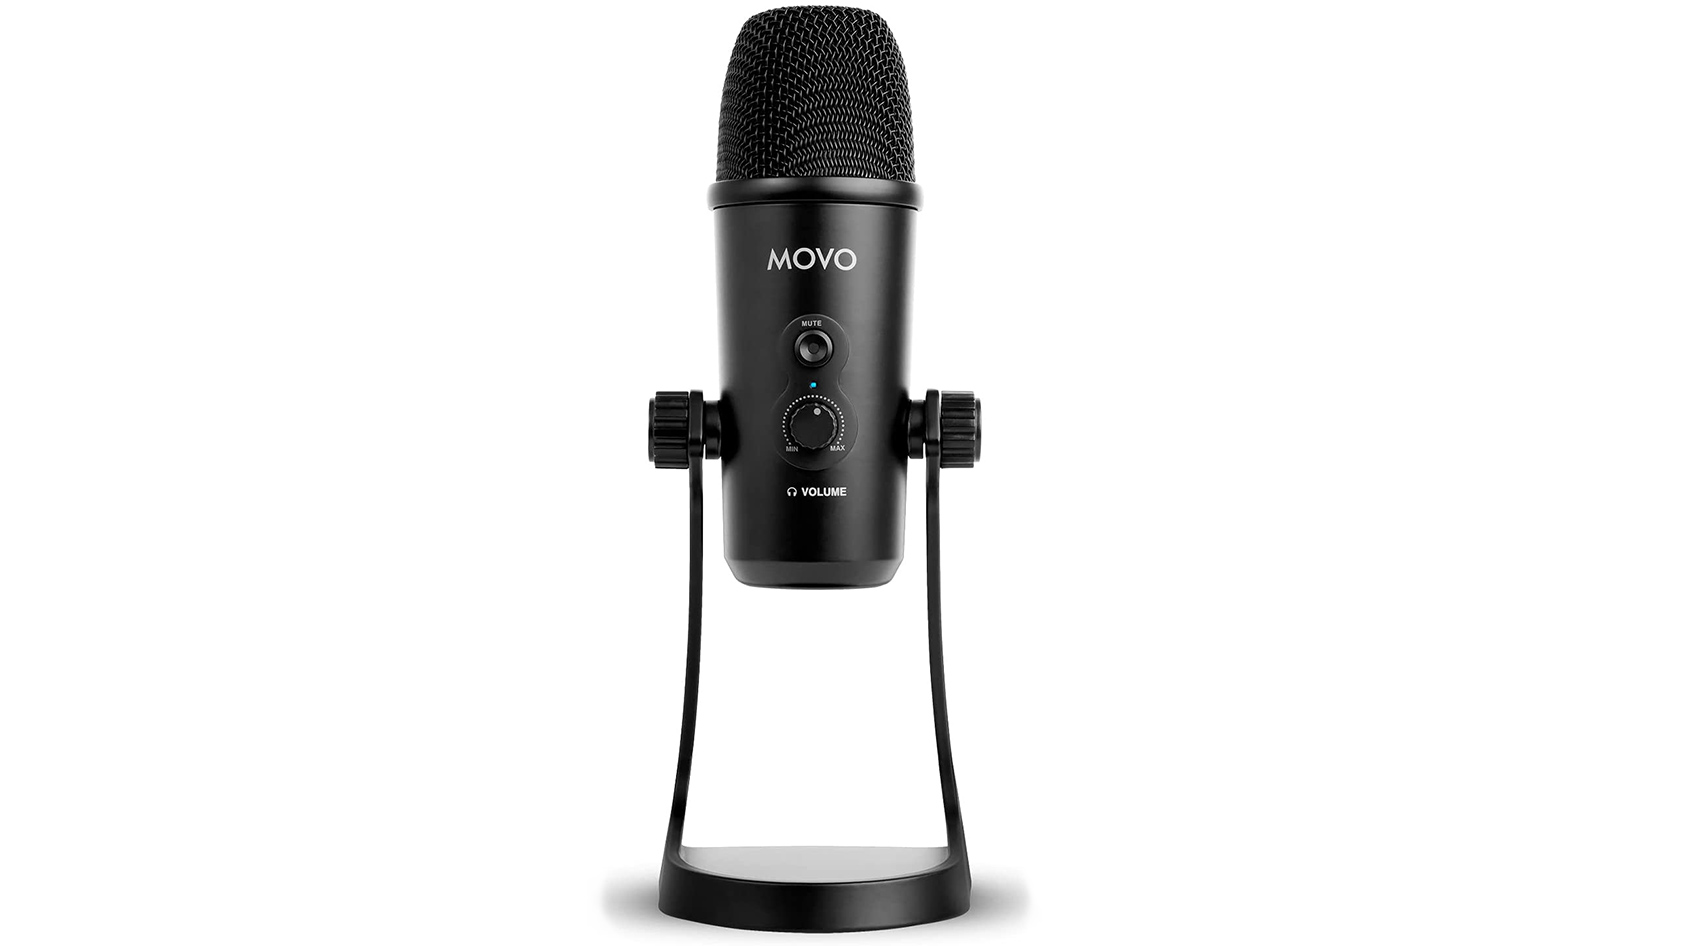 The Movo UM700 USB mic in black against a white background.